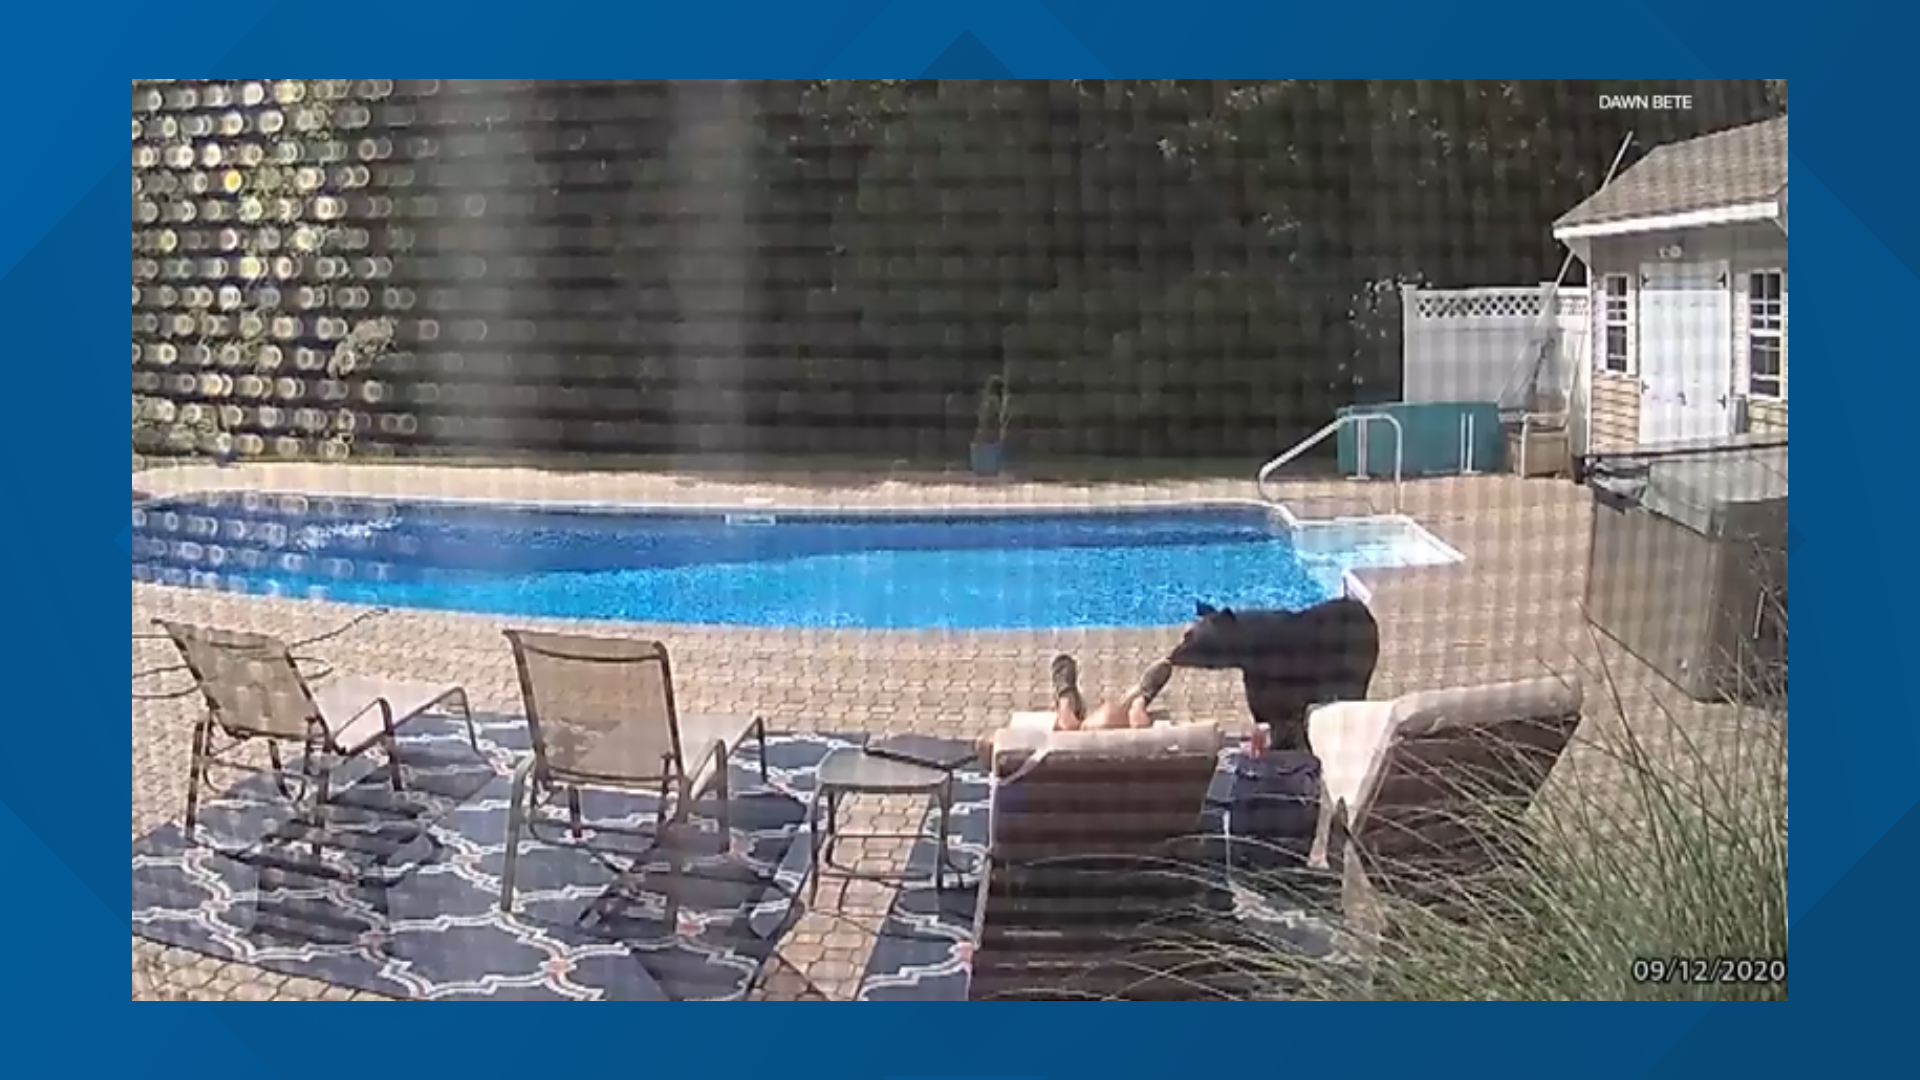 Dawn Bete shared a video on Facebook from her Ring camera of a bear walking up to a man and nudging his foot, who was presumably asleep by the pool.